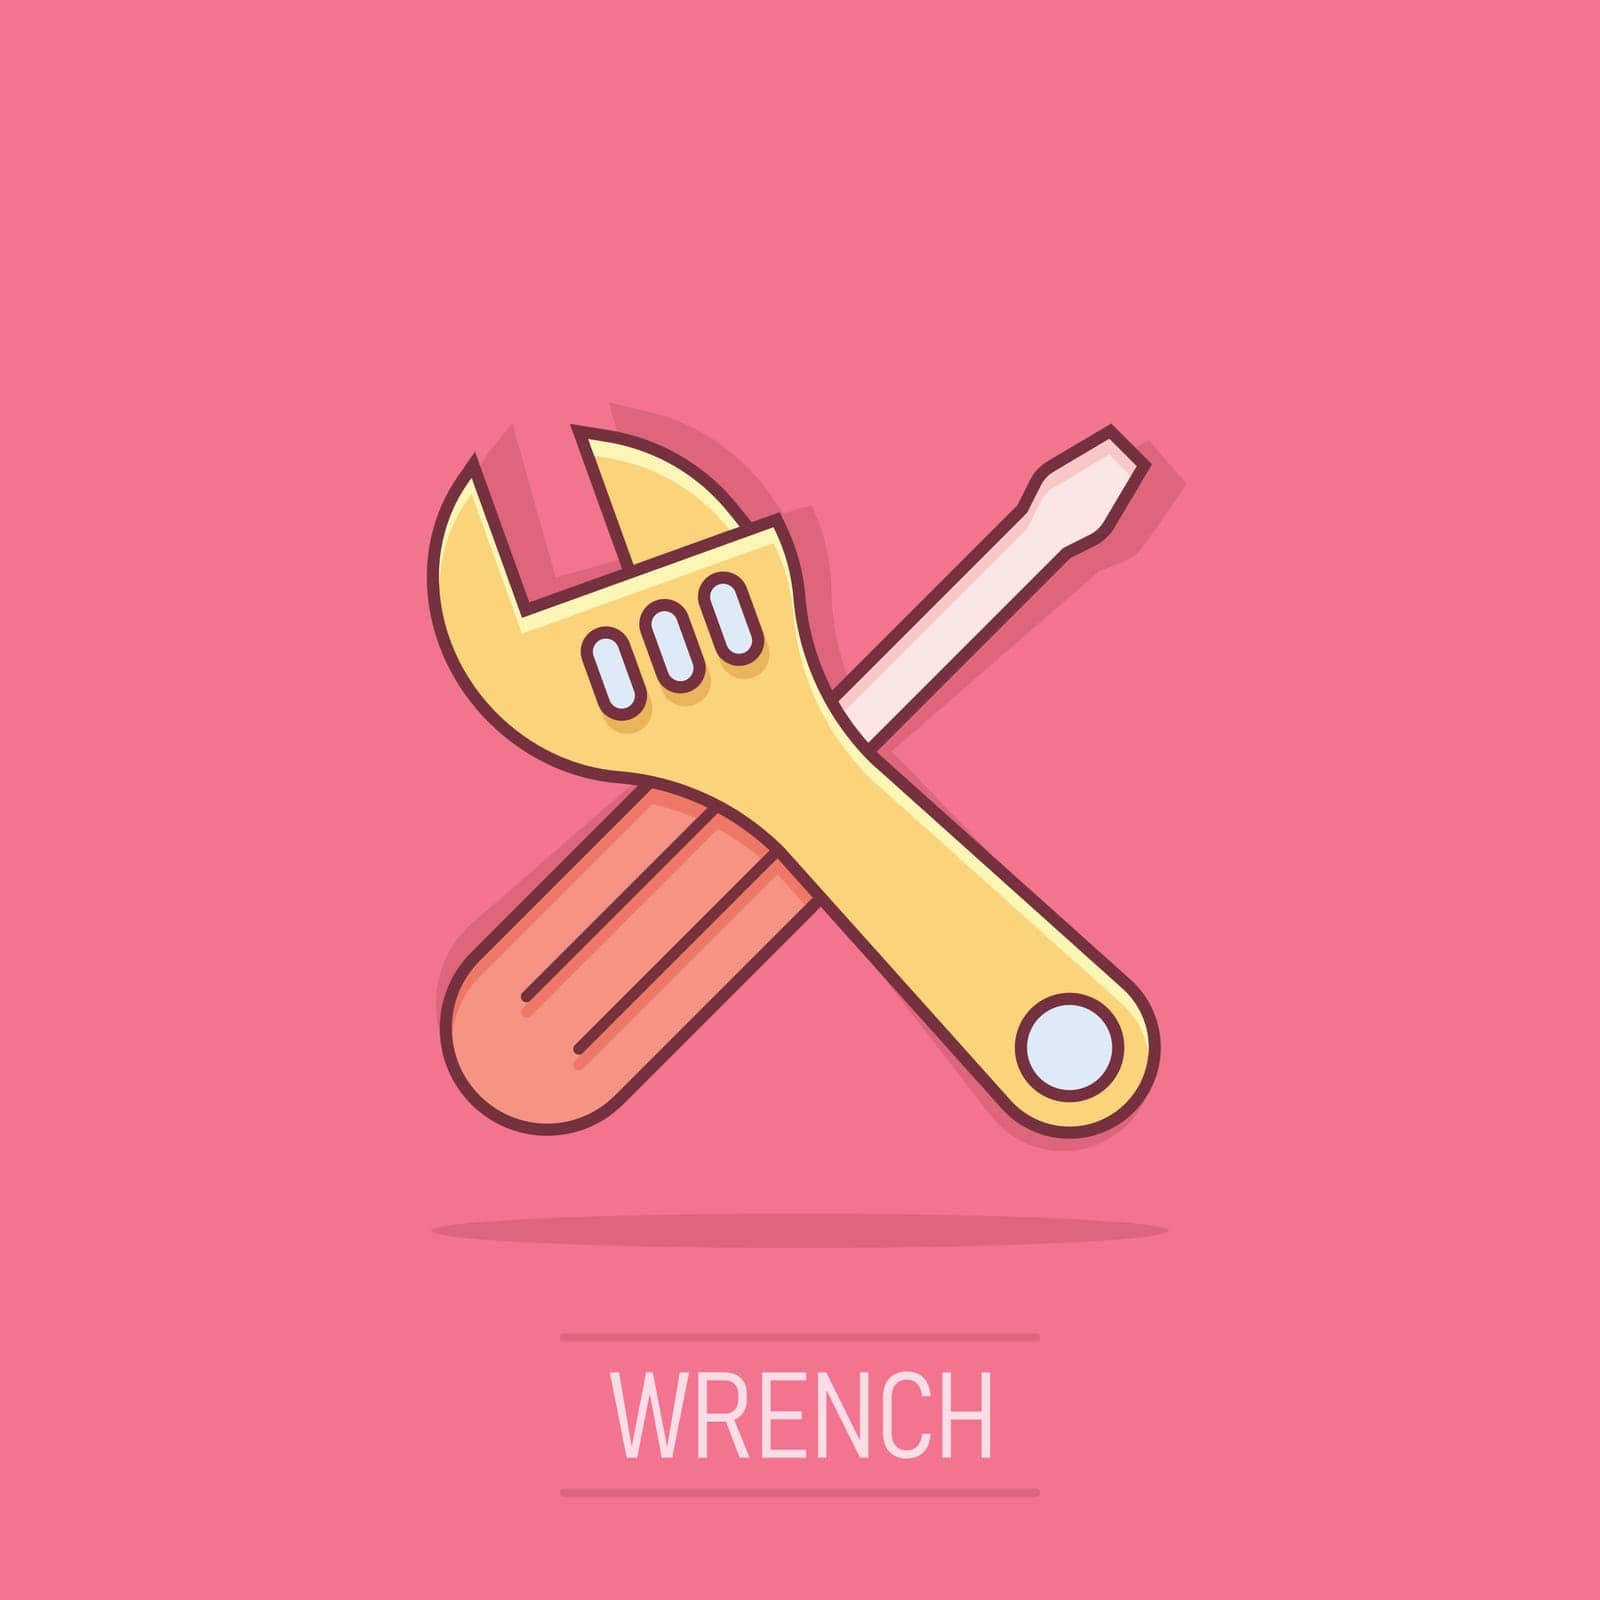 Wrench and screwdriver icon in comic style. Spanner key cartoon vector illustration on isolated background. Repair equipment splash effect business concept. by LysenkoA